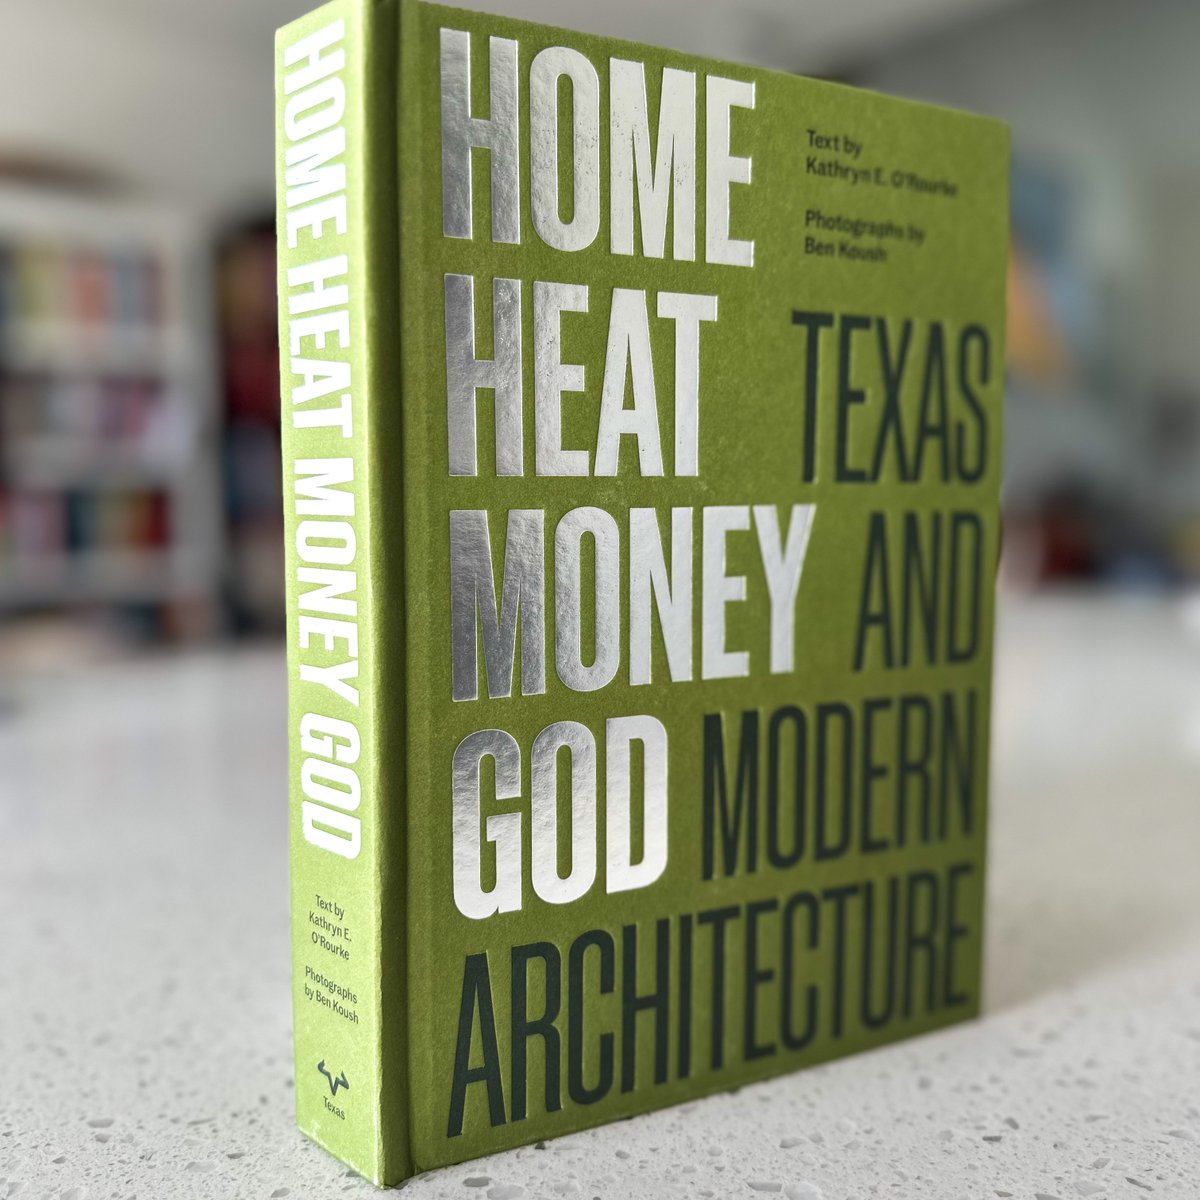 The #TexasArchitecture Bible is here, y'all. With over 264 color photos from across the state by Ben Koush, HOME, HEAT, MONEY, GOD covers big city and small town architectural treasures with short chapters by Kathryn O'Rourke reflecting on the preservation of modern buildings.